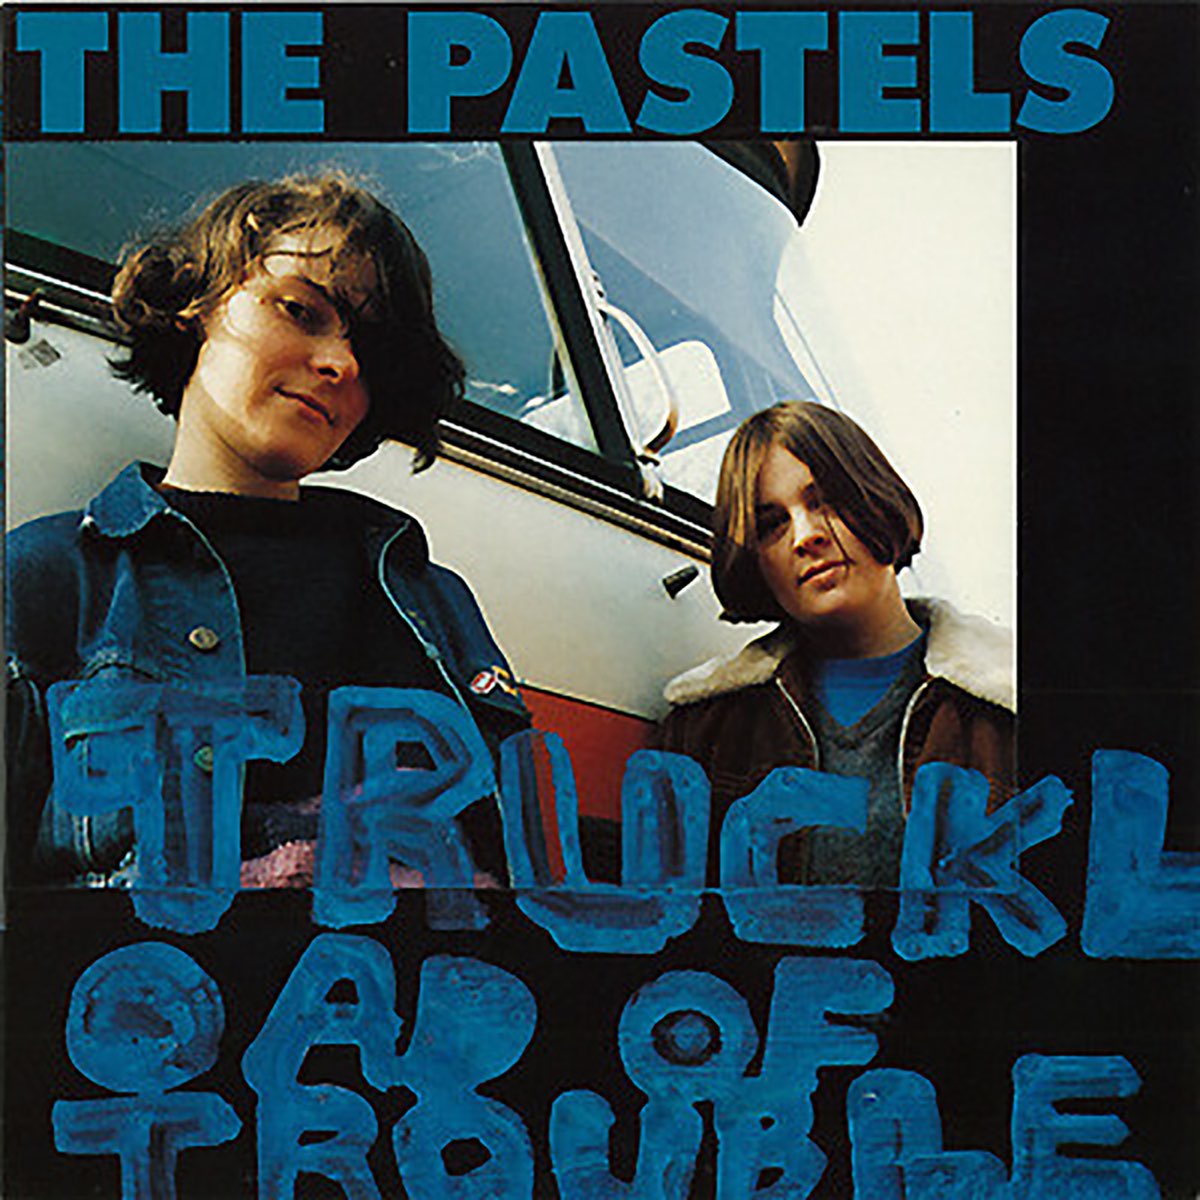 Truckload of Trouble - Album by The Pastels - Apple Music